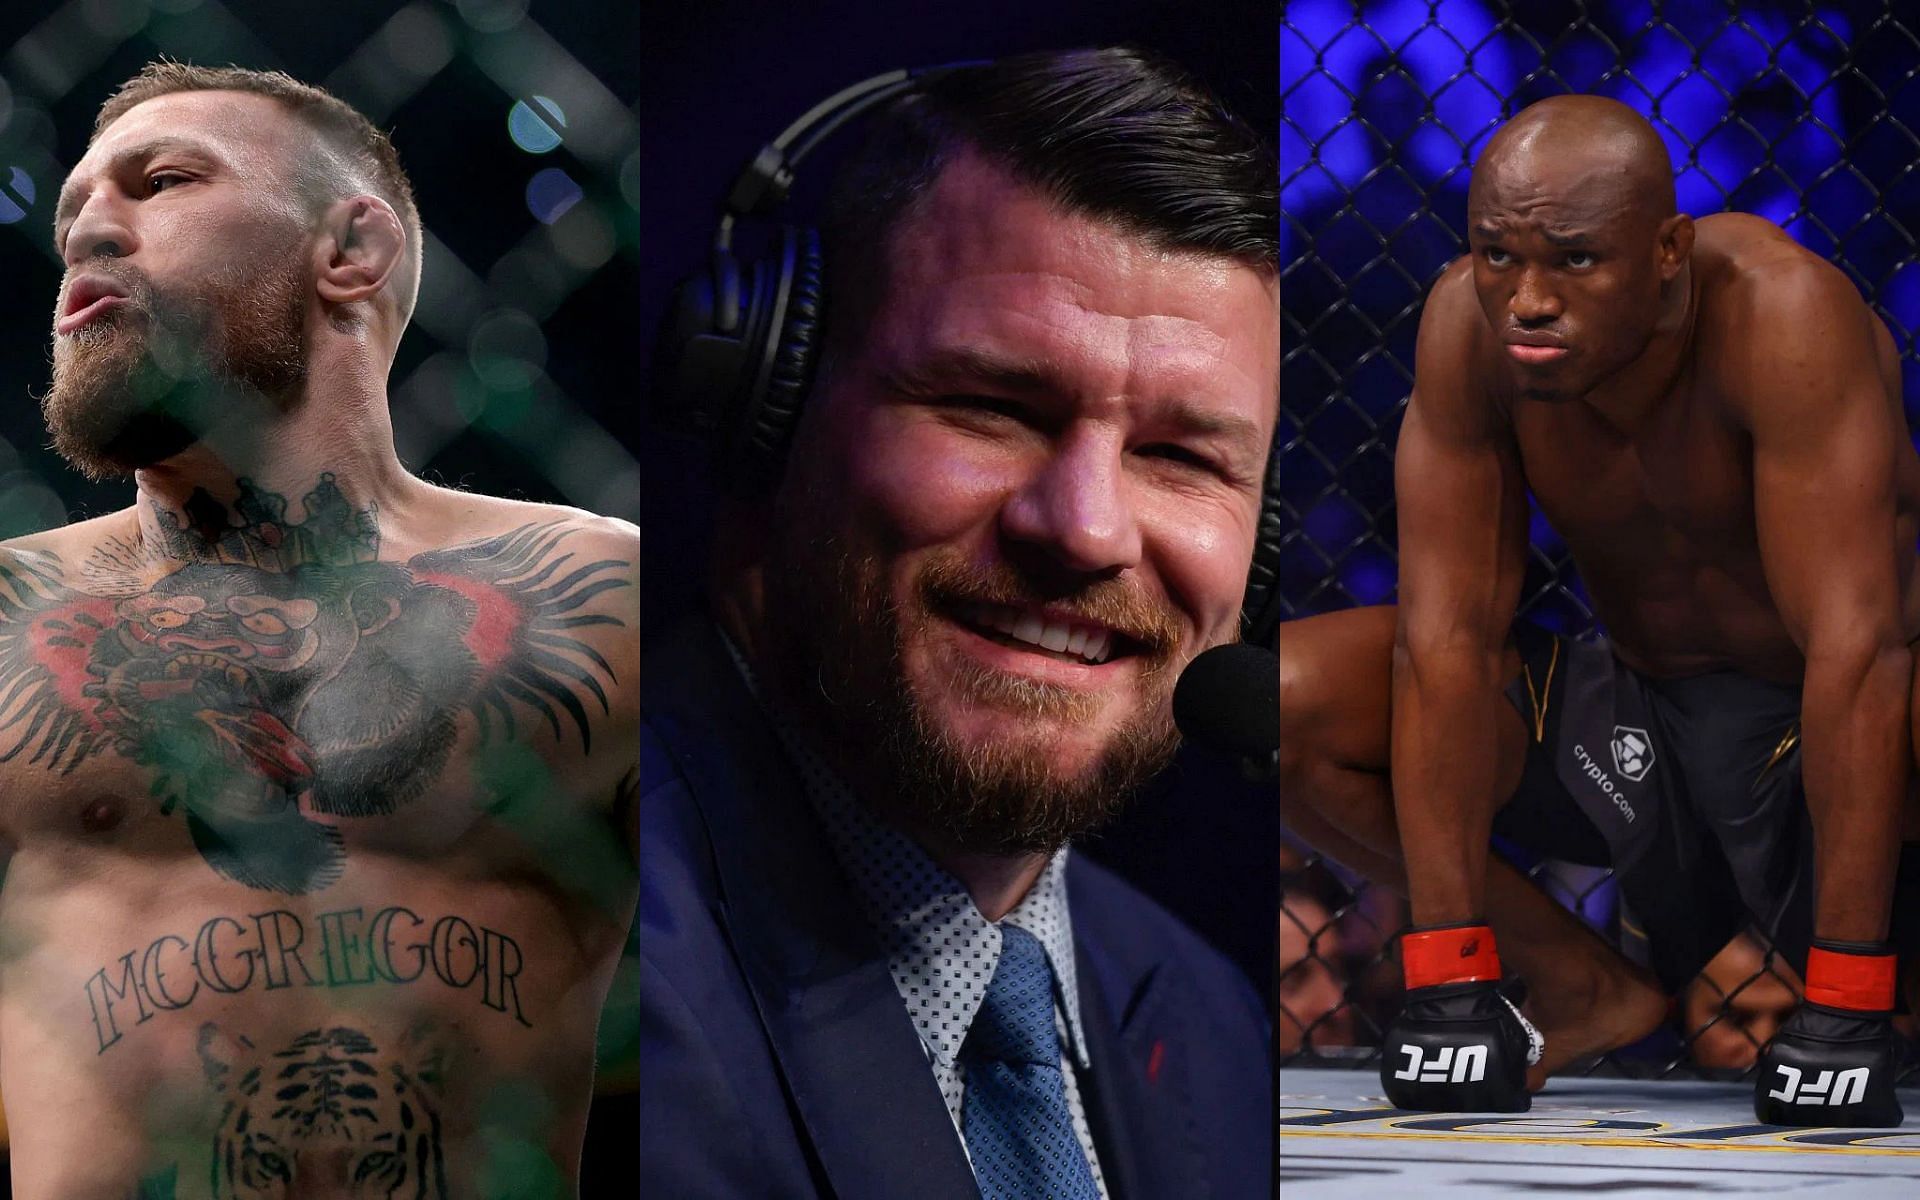 Conor McGregor (Left), Michael Bisping (Middle), and Kamaru Usman (Right) (Images courtesy of getty)